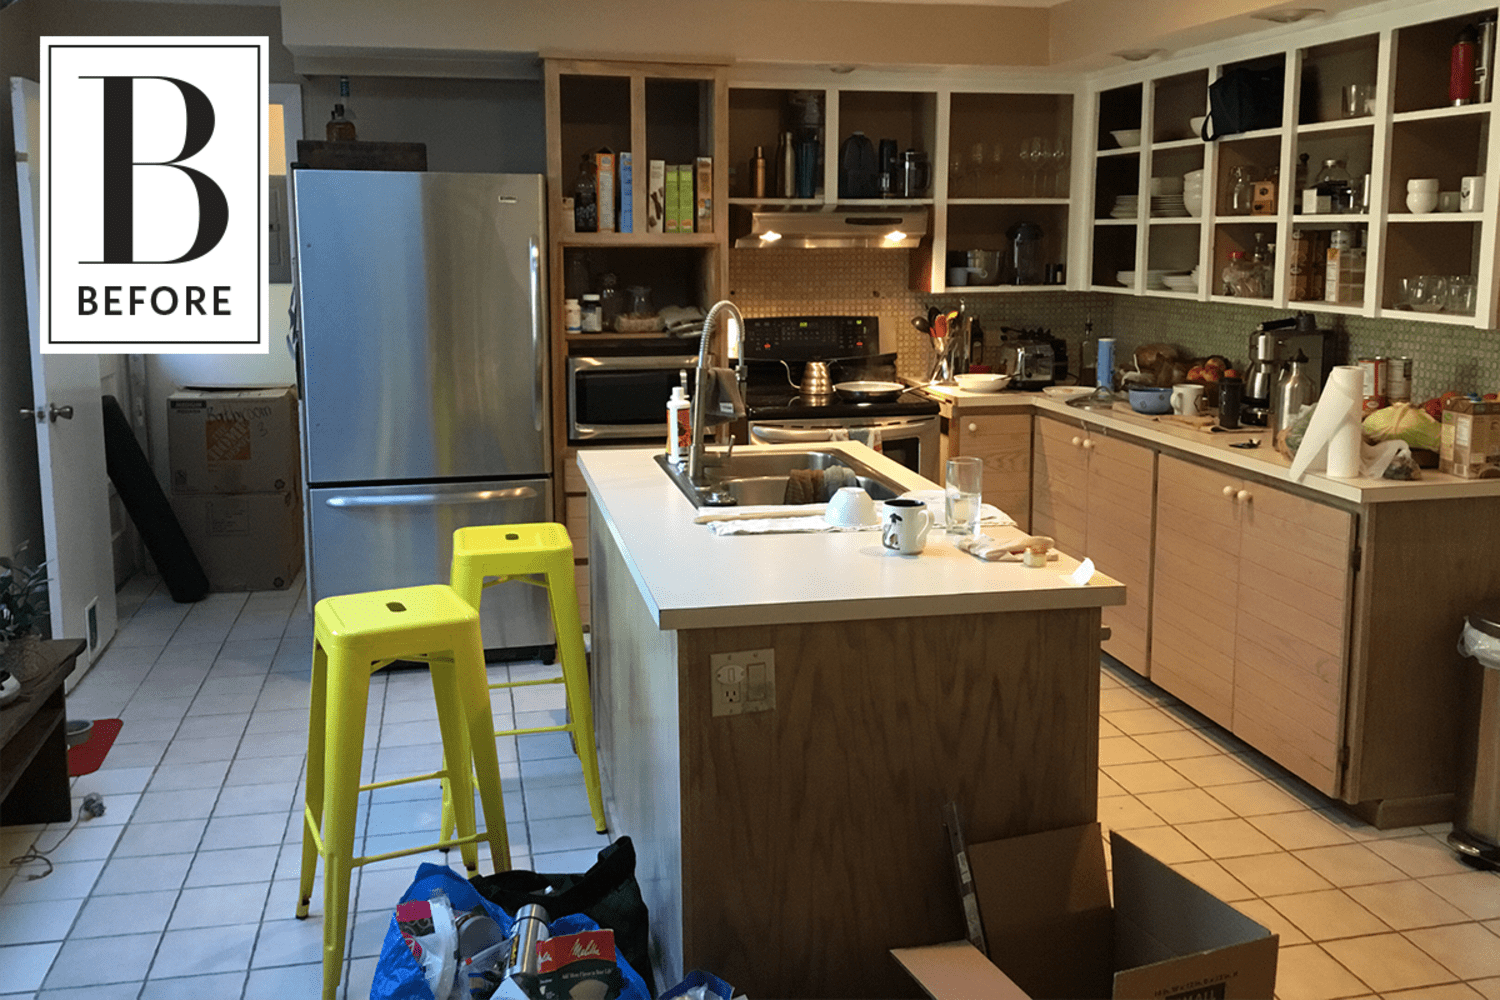 Before & After: A Major Gut-It-All Kitchen Renovation | Apartment Therapy